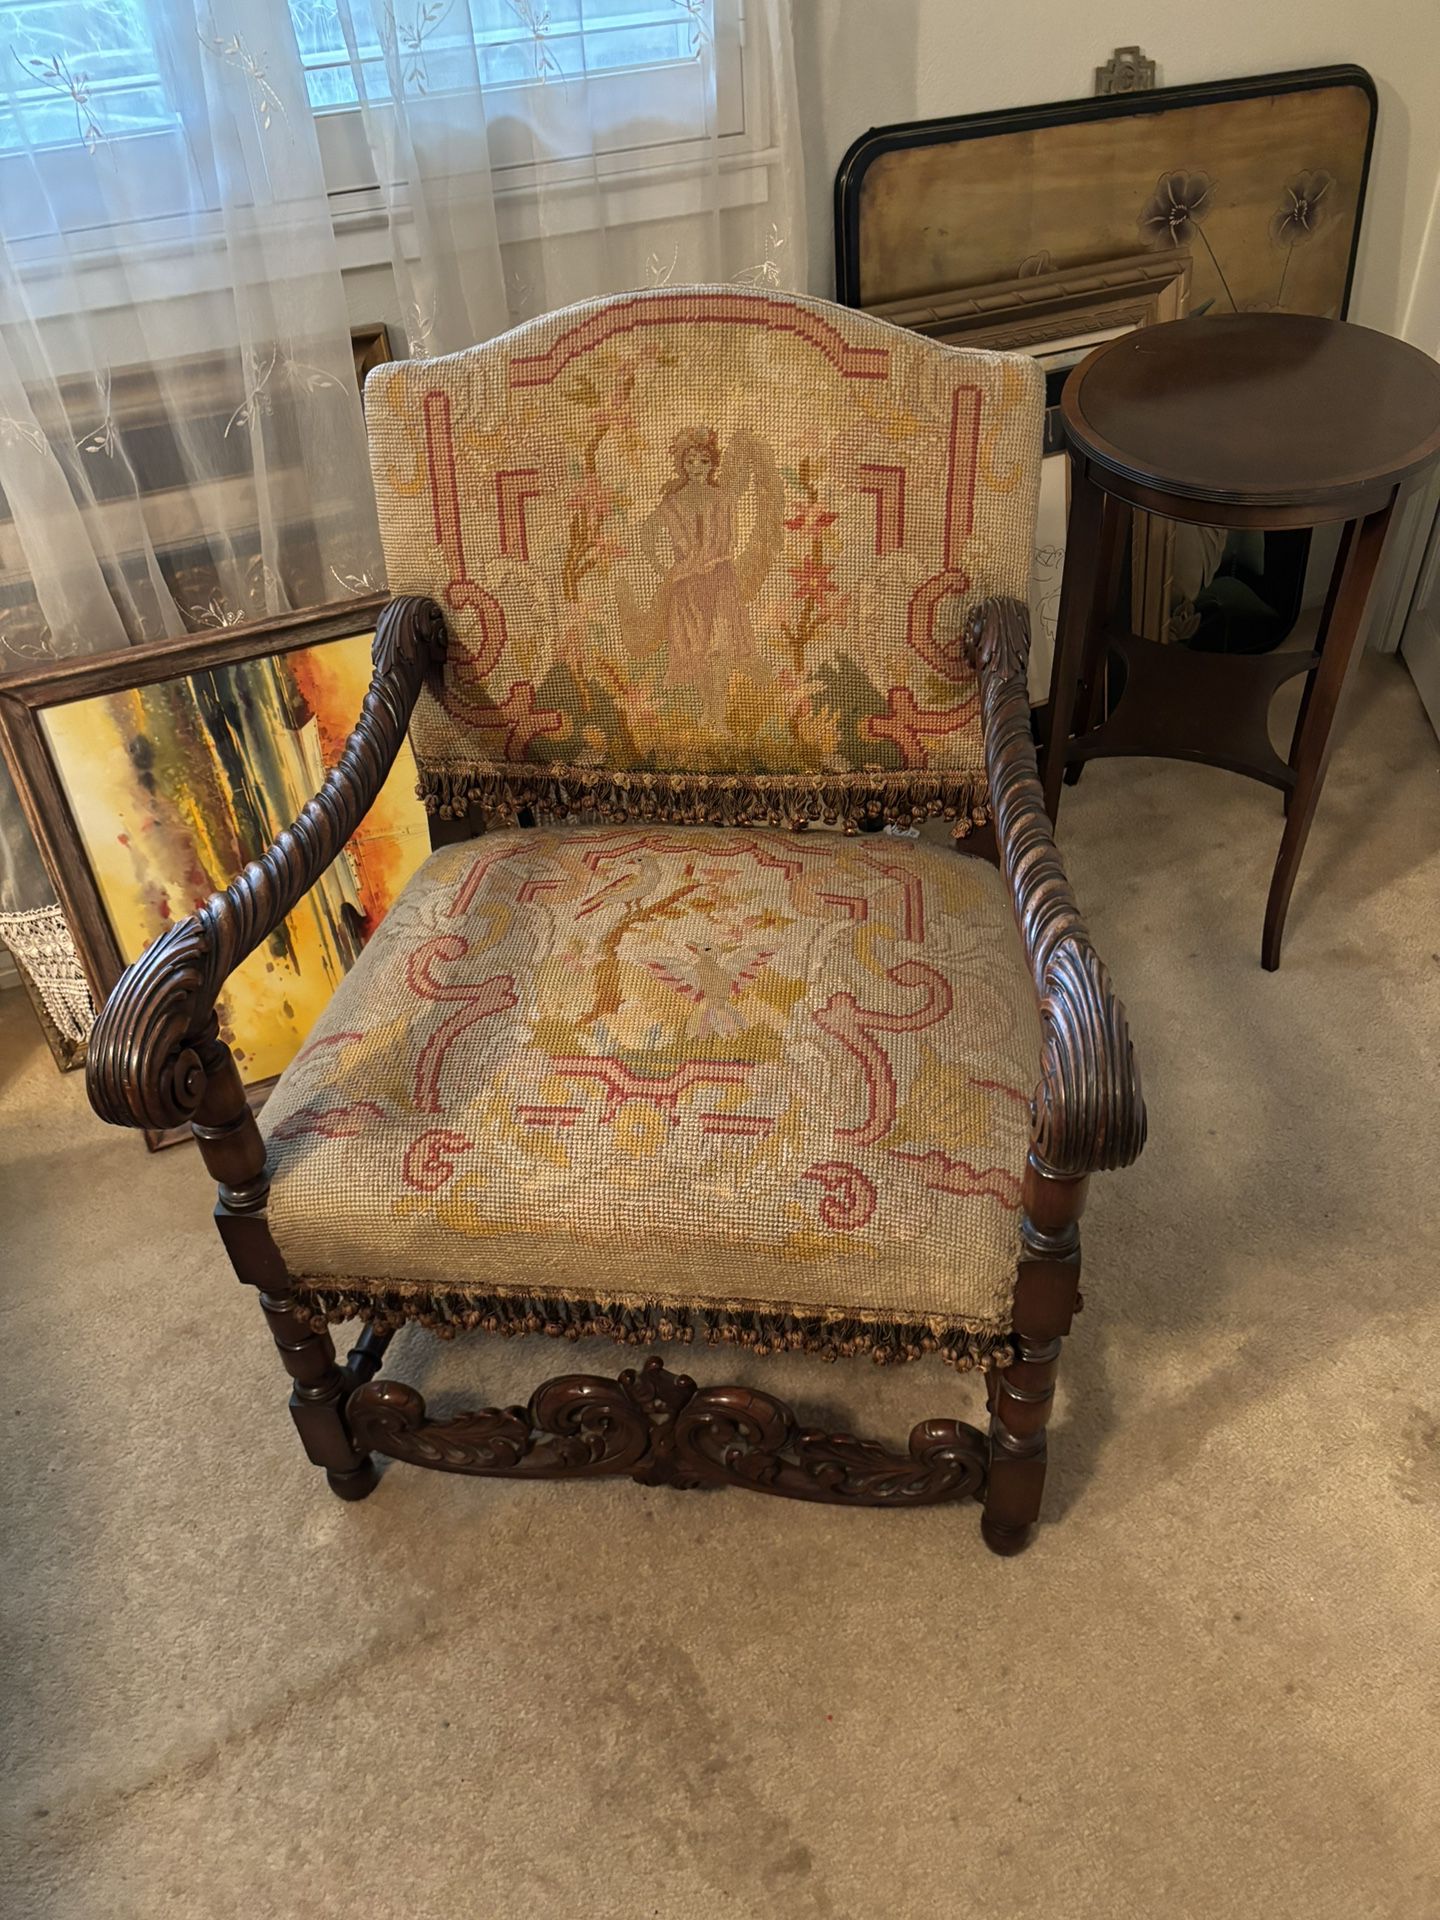 Needle Point Chair From The 1800’s